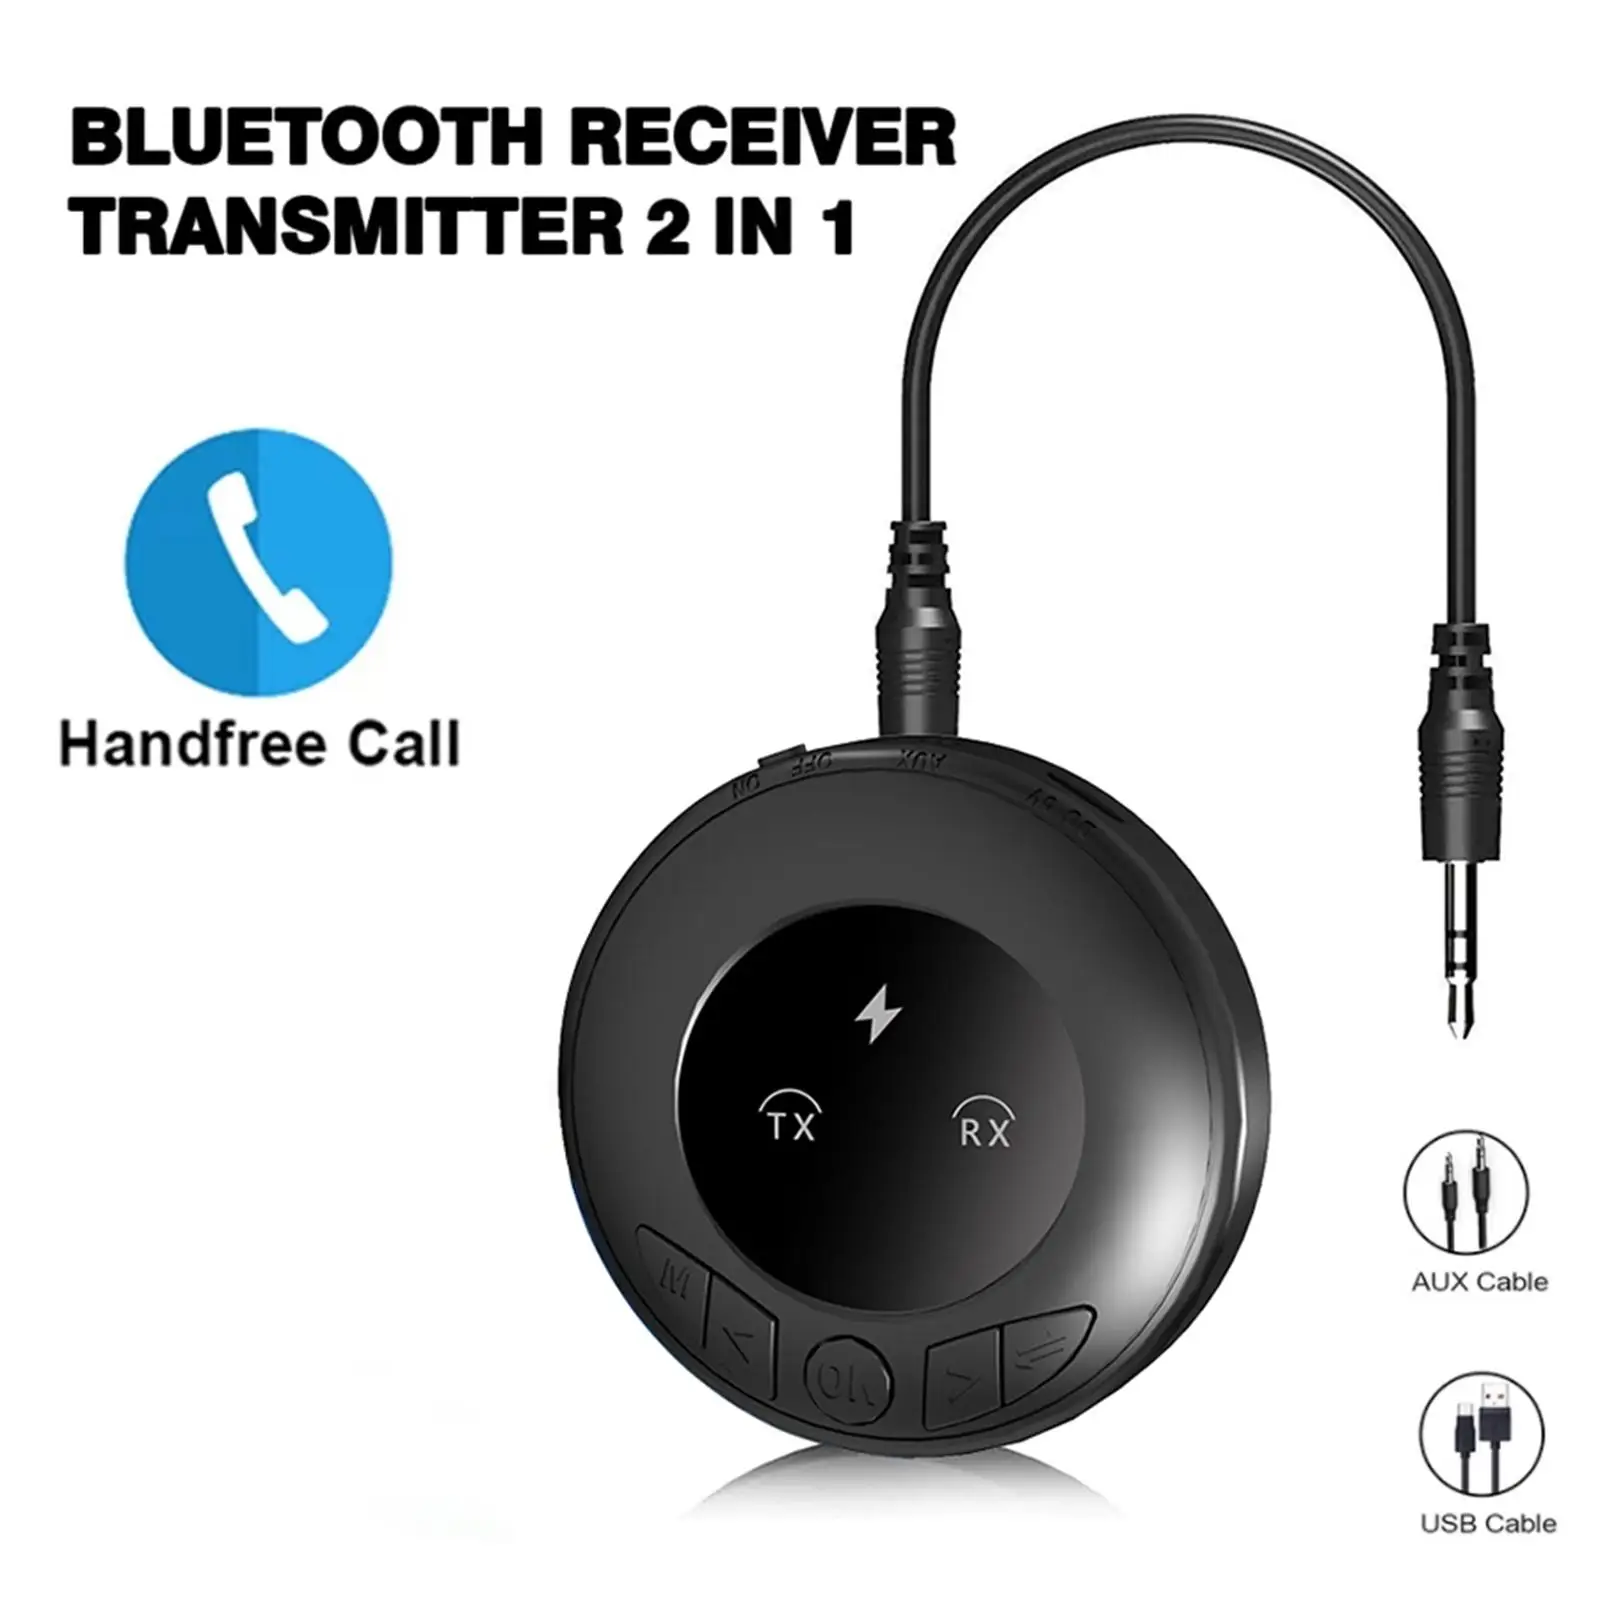 Bluetooth 5.0 Transmitter Receiver Handsfree Call Wireless Audio Adapter for Computer